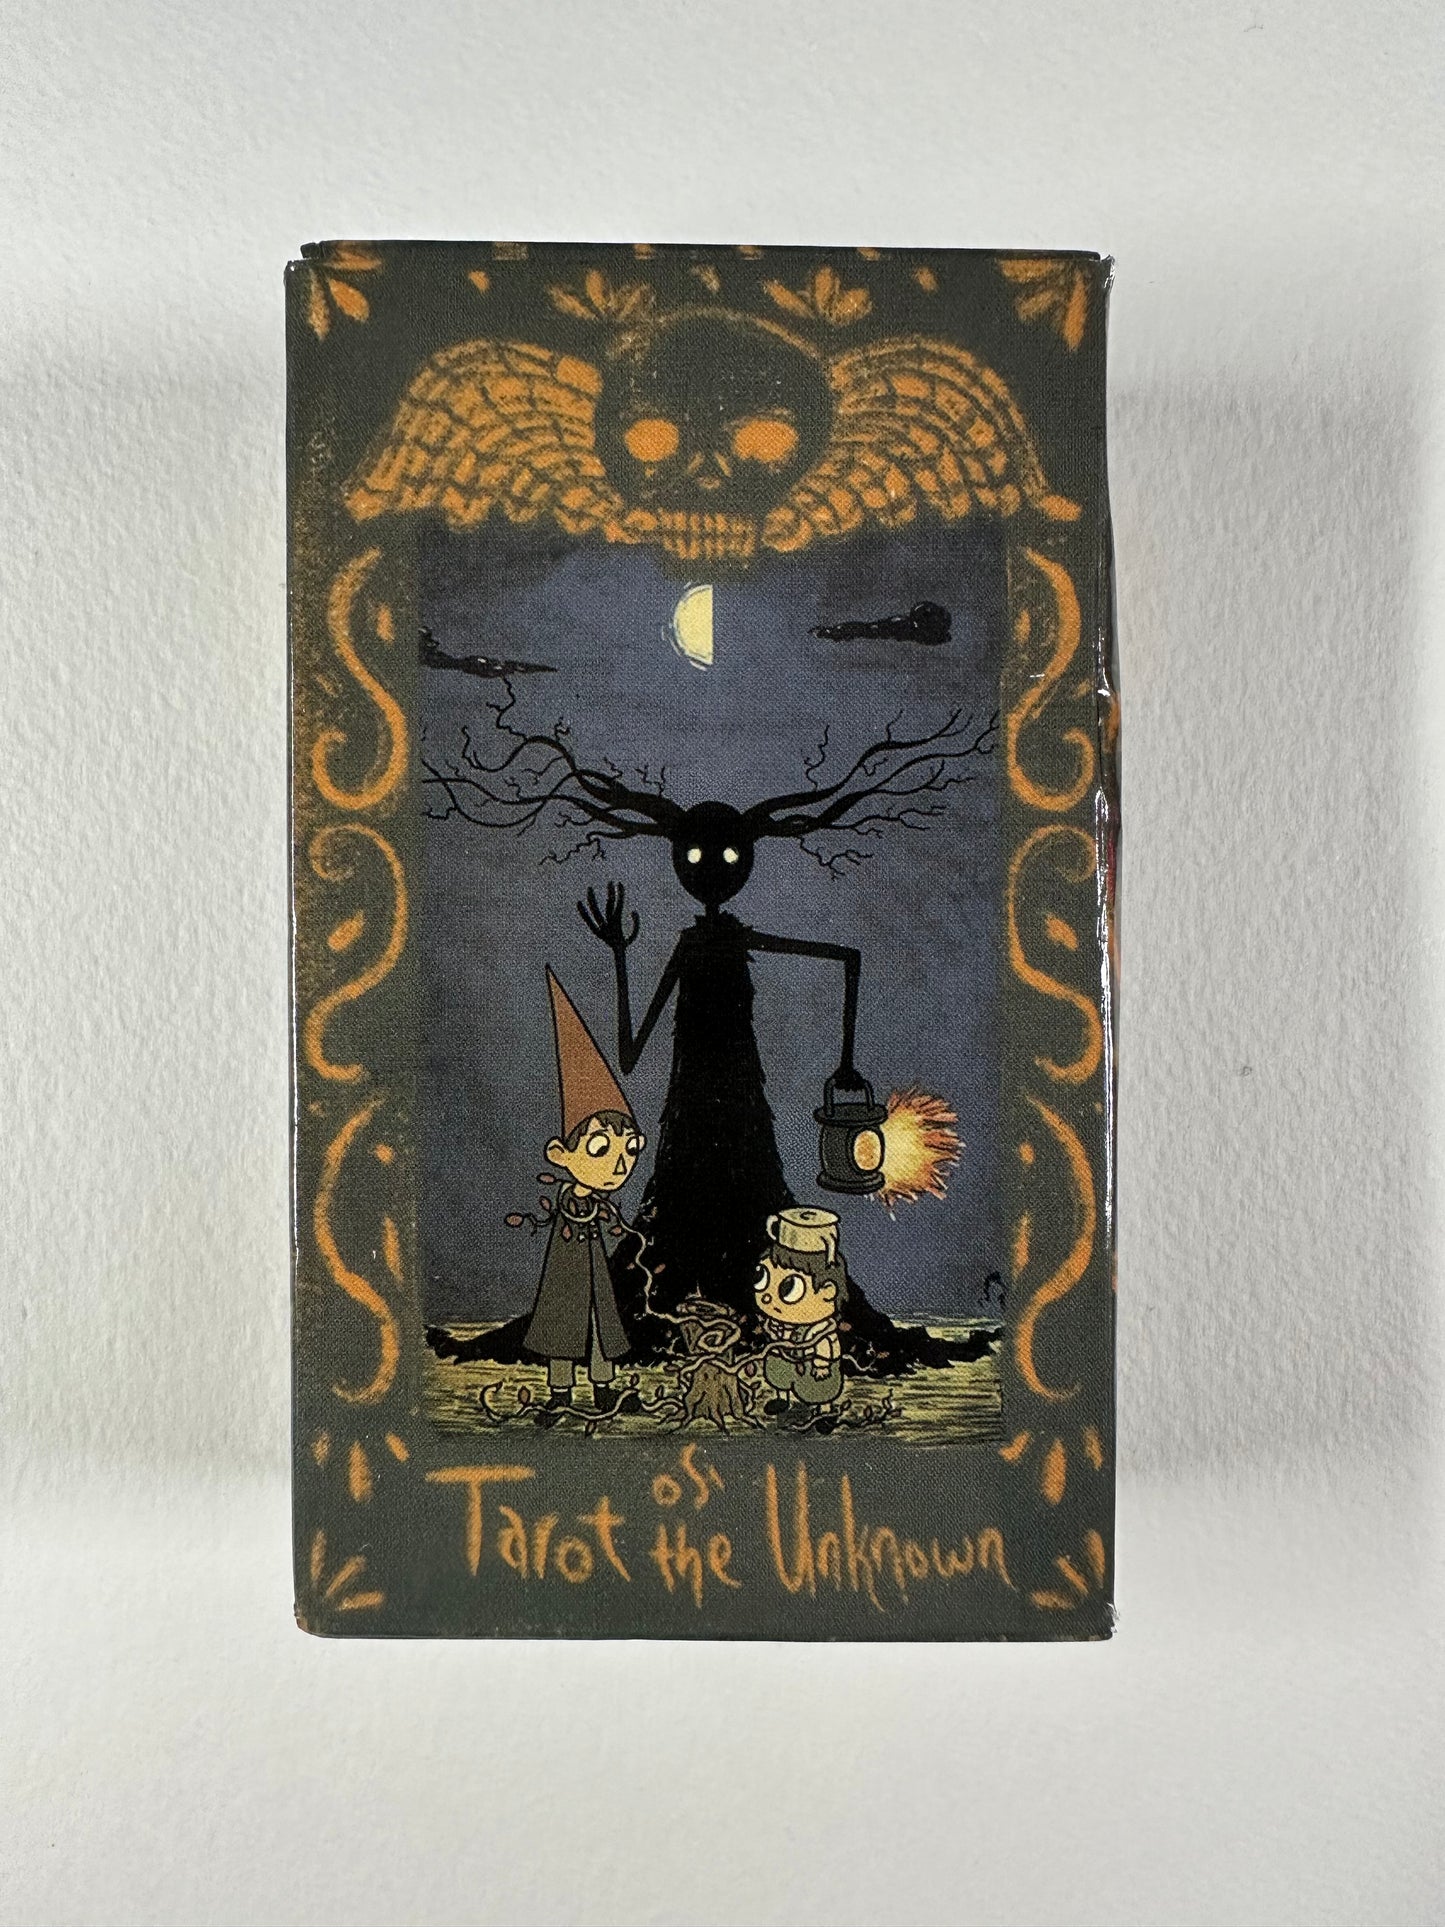 Tarot Reading with The Tarot of the Unknown